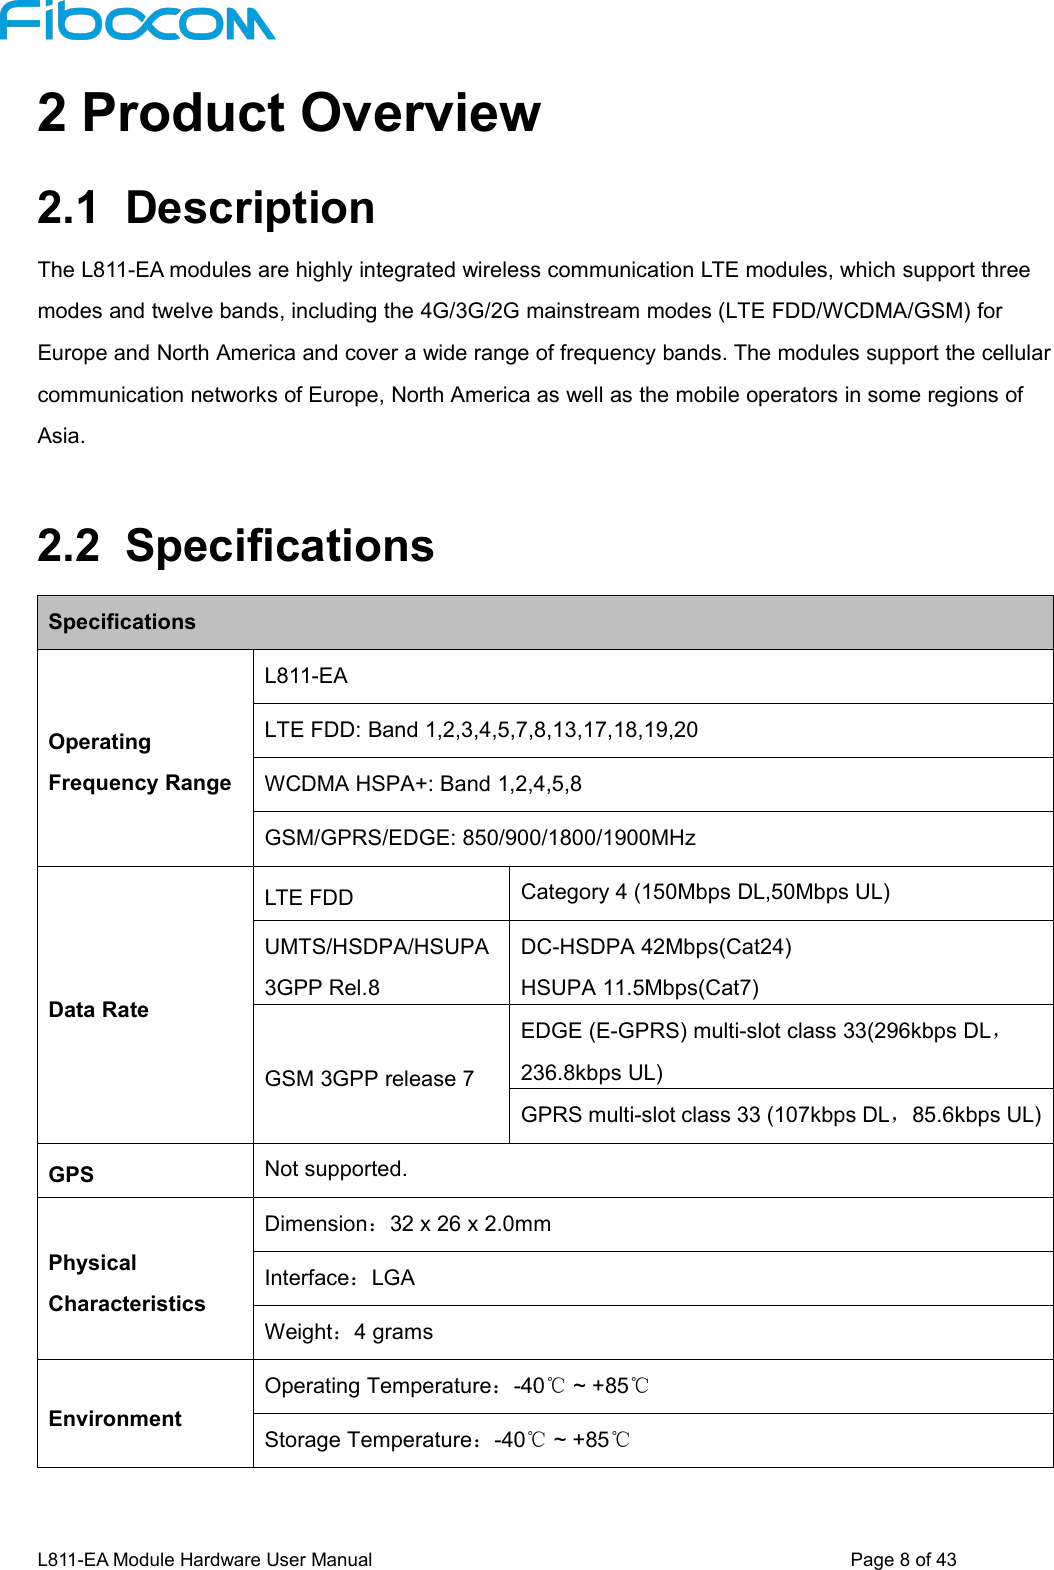 L811-EA Module Hardware User Manual Page8of432 Product Overview2.1 DescriptionThe L811-EA modules are highly integrated wireless communication LTE modules, which support threemodes and twelve bands, including the 4G/3G/2G mainstream modes (LTE FDD/WCDMA/GSM) forEurope and North America and cover a wide range of frequency bands. The modules support the cellularcommunication networks of Europe, North America as well as the mobile operators in some regions ofAsia.2.2 SpecificationsSpecificationsOperatingFrequency RangeL811-EALTE FDD: Band 1,2,3,4,5,7,8,13,17,18,19,20WCDMA HSPA+: Band 1,2,4,5,8GSM/GPRS/EDGE: 850/900/1800/1900MHzData RateLTE FDDCategory 4 (150Mbps DL,50Mbps UL)UMTS/HSDPA/HSUPA3GPP Rel.8DC-HSDPA 42Mbps(Cat24)HSUPA 11.5Mbps(Cat7)GSM 3GPP release 7EDGE (E-GPRS) multi-slot class 33(296kbps DL，236.8kbps UL)GPRS multi-slot class 33 (107kbps DL，85.6kbps UL)GPSNot supported.PhysicalCharacteristicsDimension：32 x 26 x 2.0mmInterface：LGAWeight：4 gramsEnvironmentOperating Temperature：-40℃~ +85℃Storage Temperature：-40℃~ +85℃